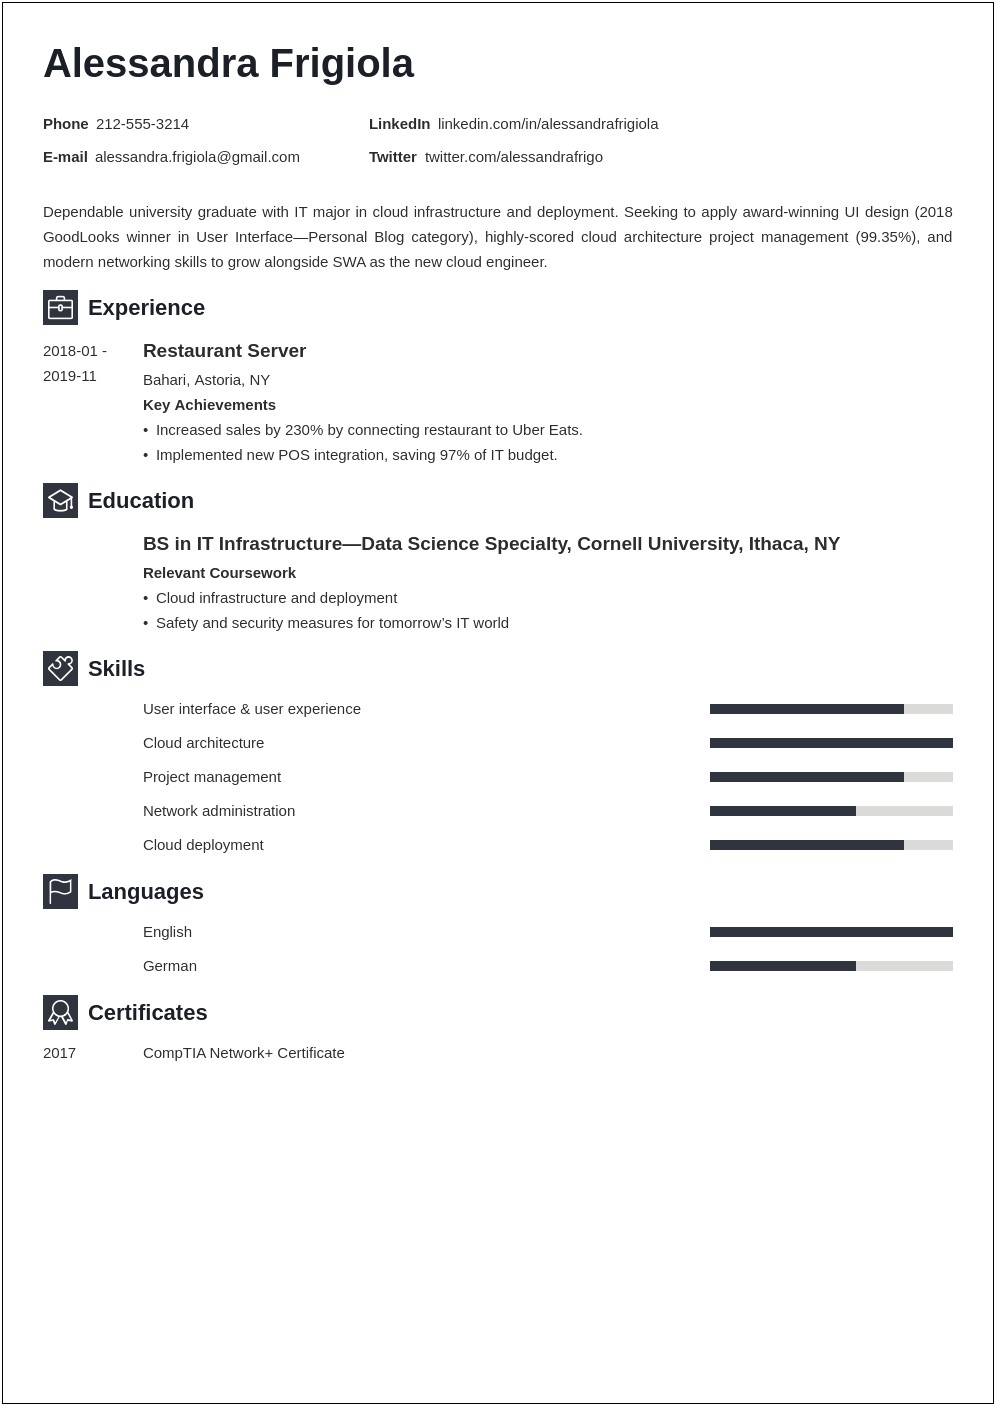 Objective Field In Resume Examples